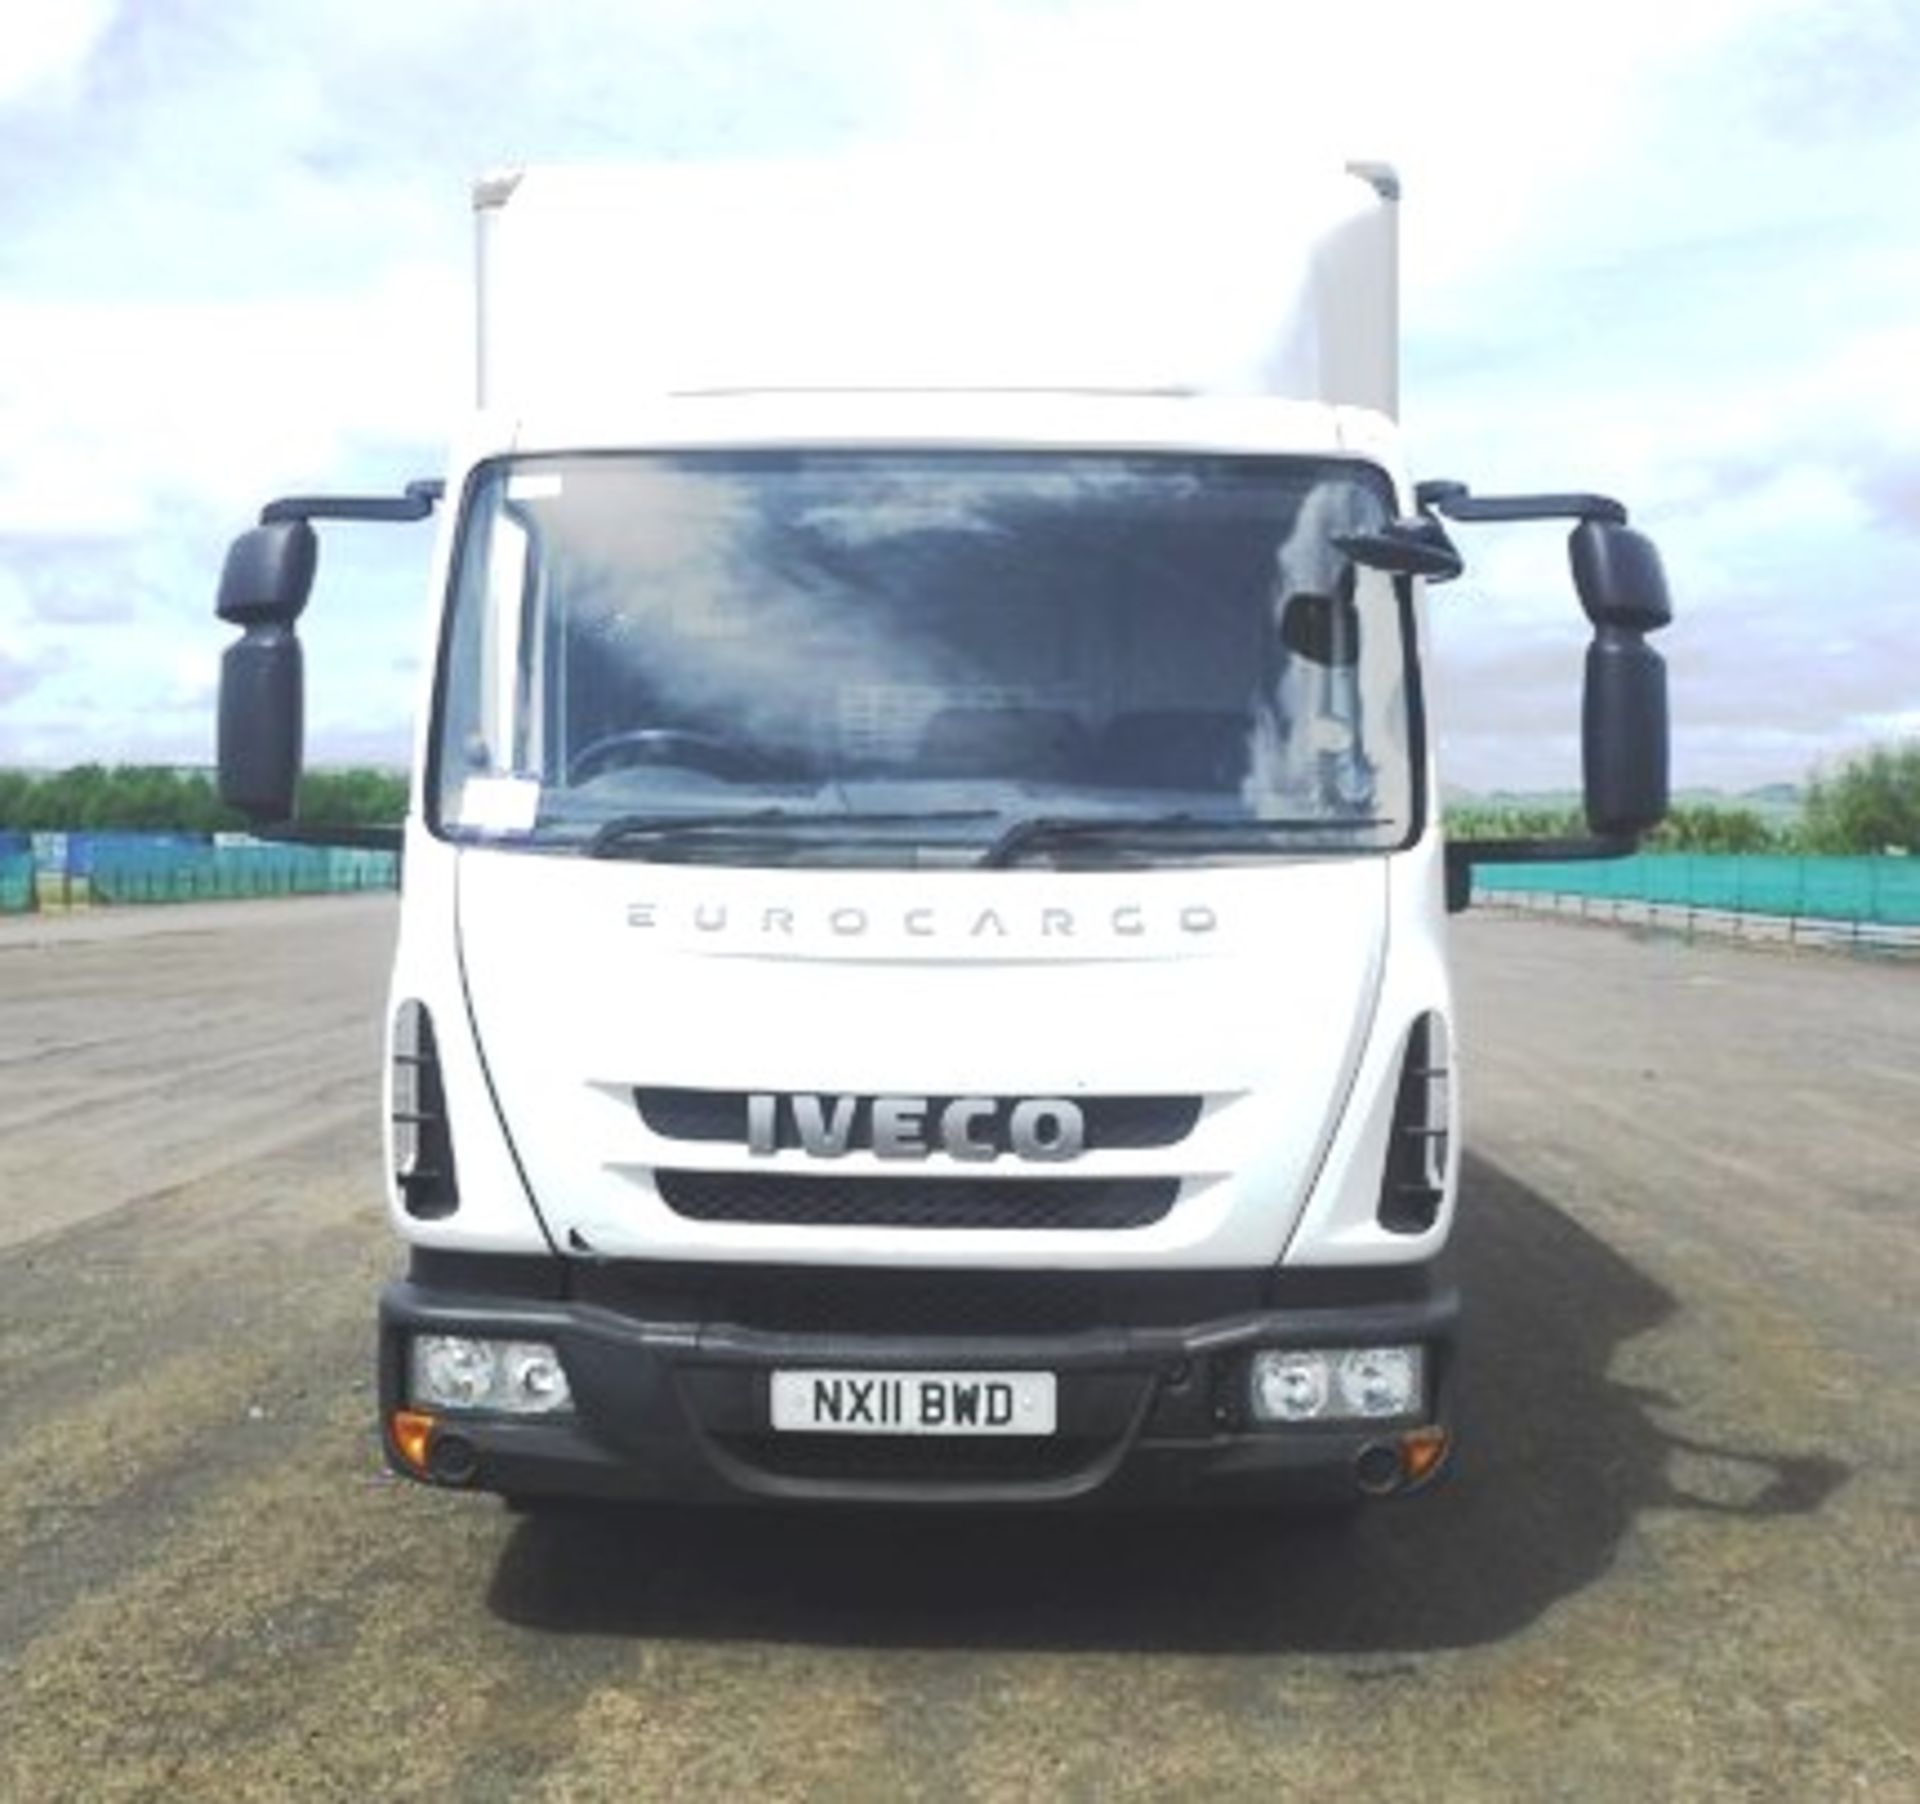 IVECO MODEL EUROCARGO (MY 2008) - 3920cc - Image 4 of 27